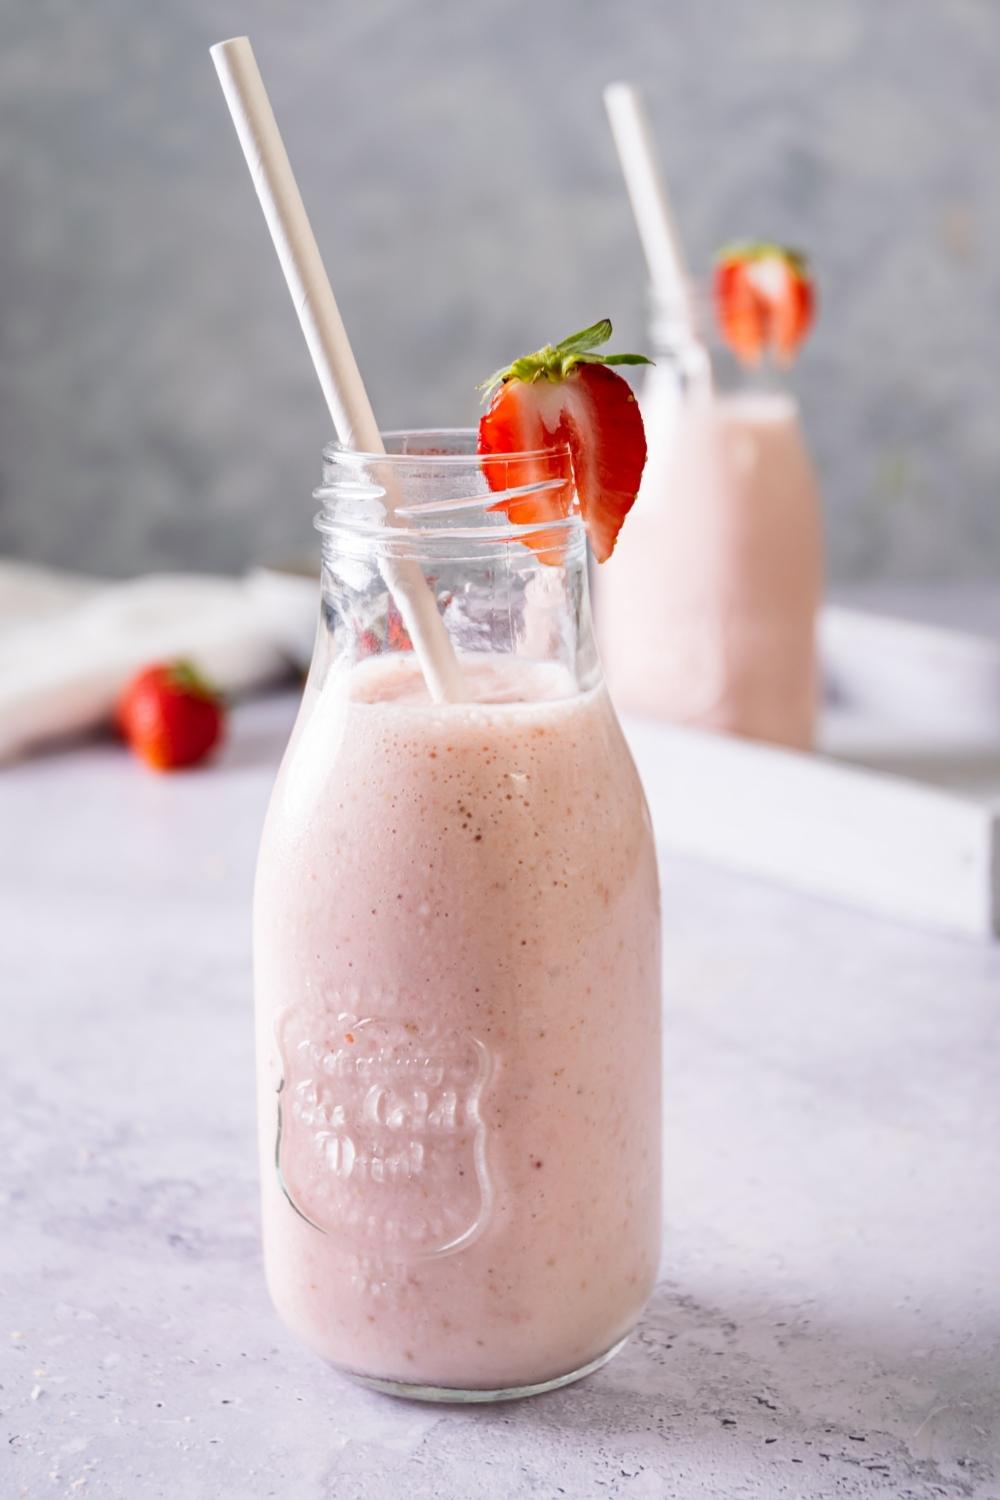 A strawberry banana smoothie in a glass with a straw in it and sliced strawberry on the rim.